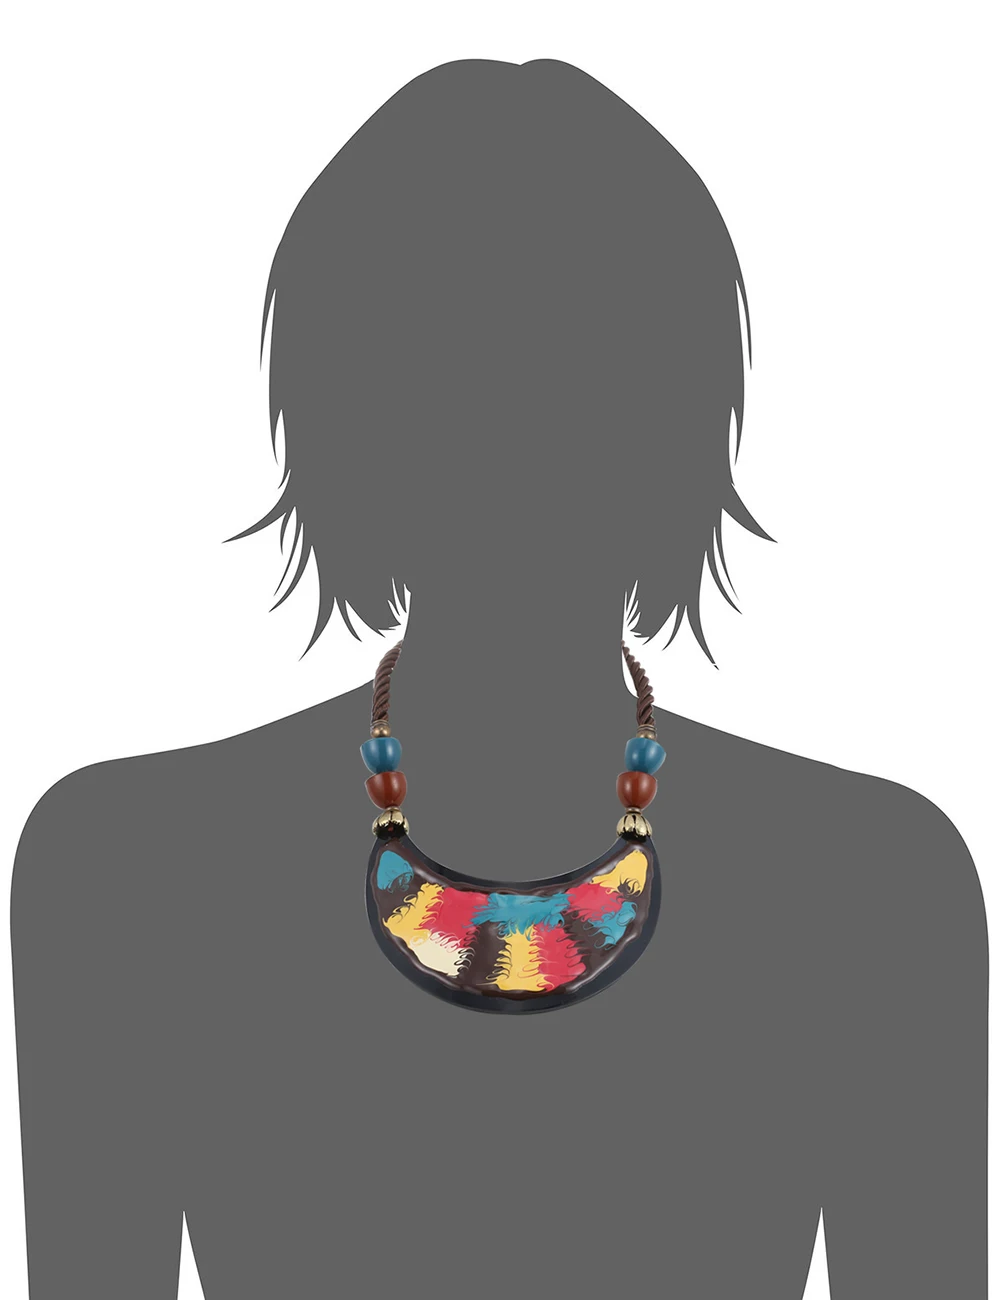 Enamel resin necklace rope choker necklaces for women colorful handmade painting statement necklace chic jewelry eManco